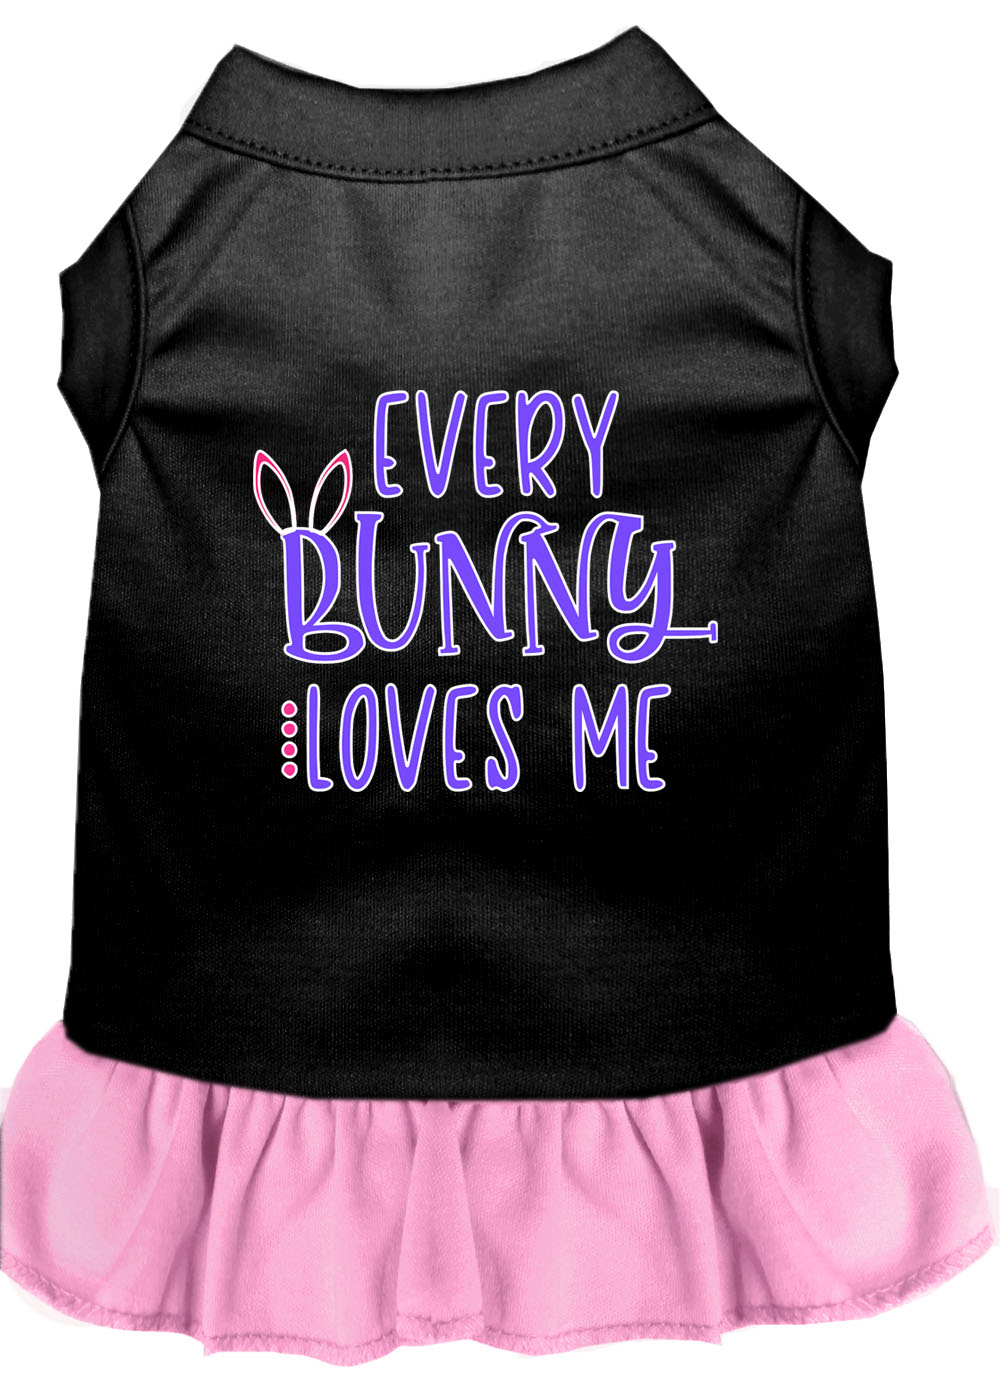 Every Bunny Loves me Screen Print Dog Dress Black with Light Pink XL